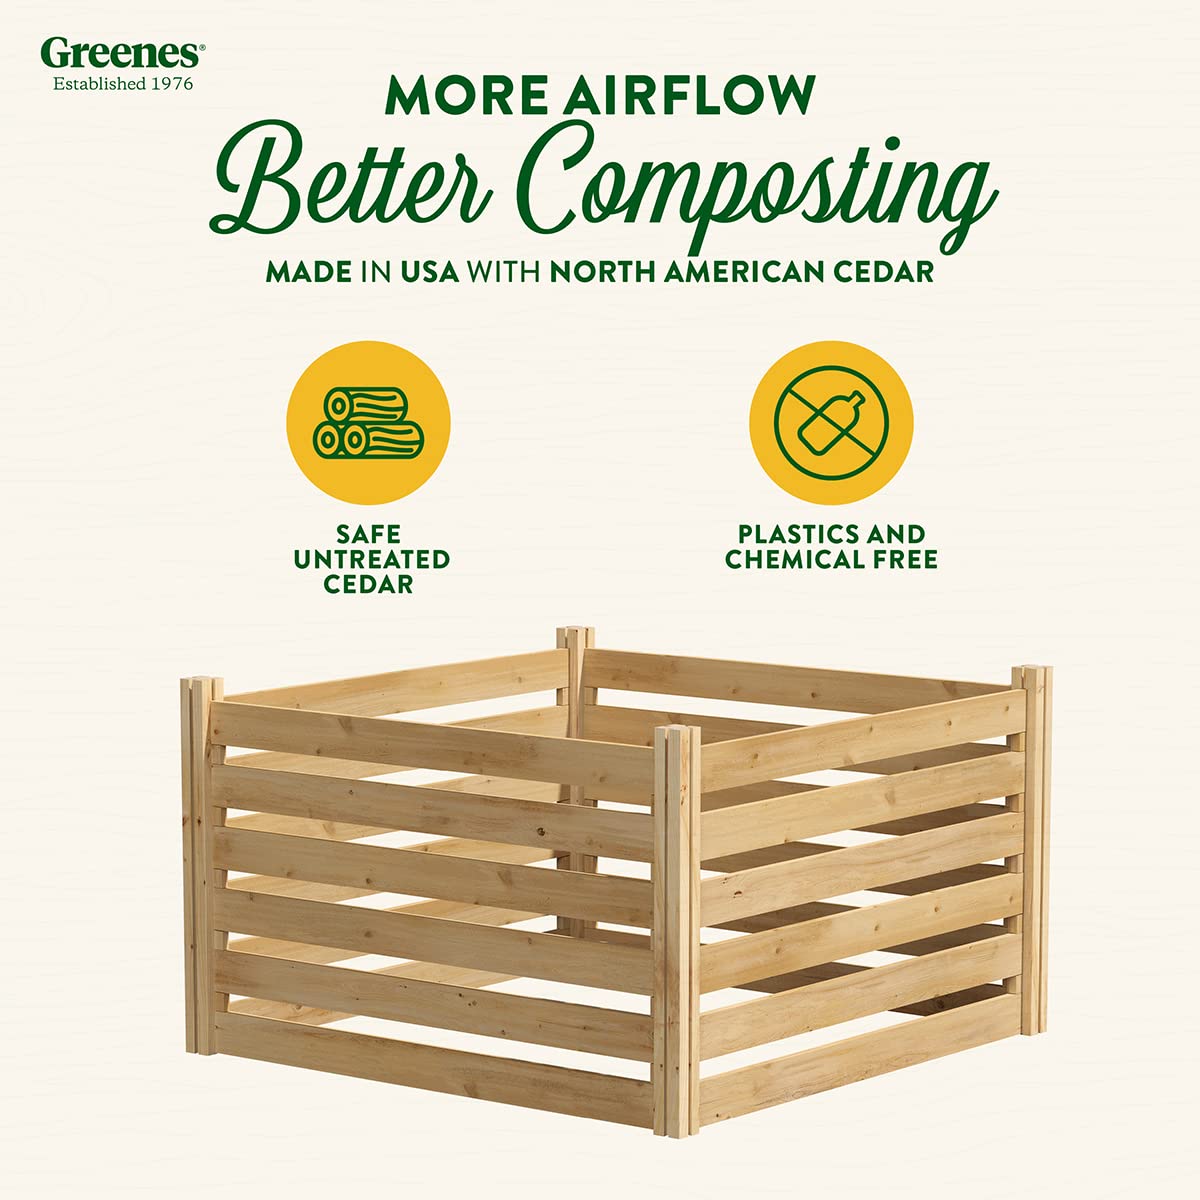 Greenes Fence Cedar Wood Composter, 23.25 Cu ft / 173.92 gallons - Made in USA with North American Cedar